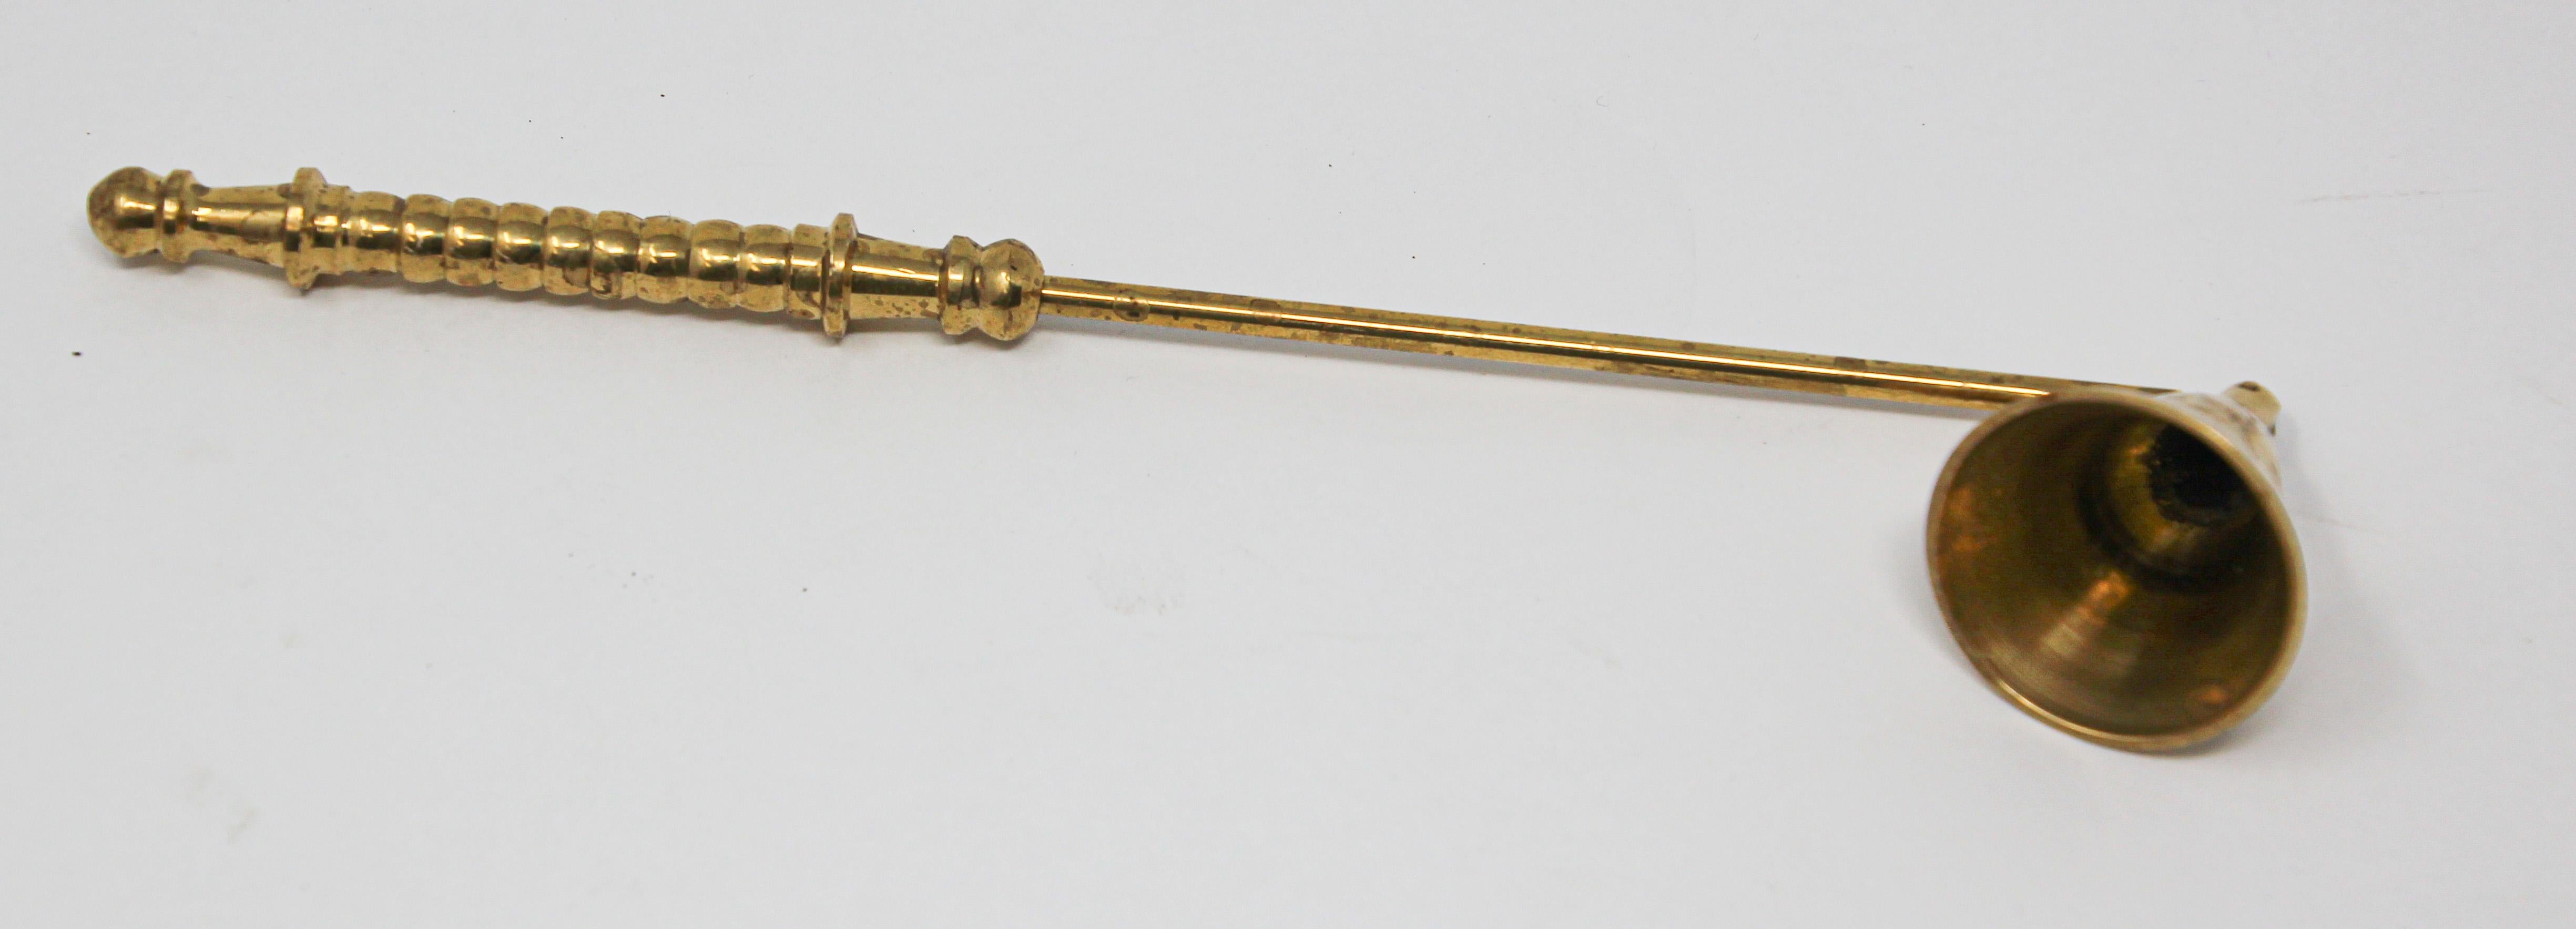 antique candle snuffer